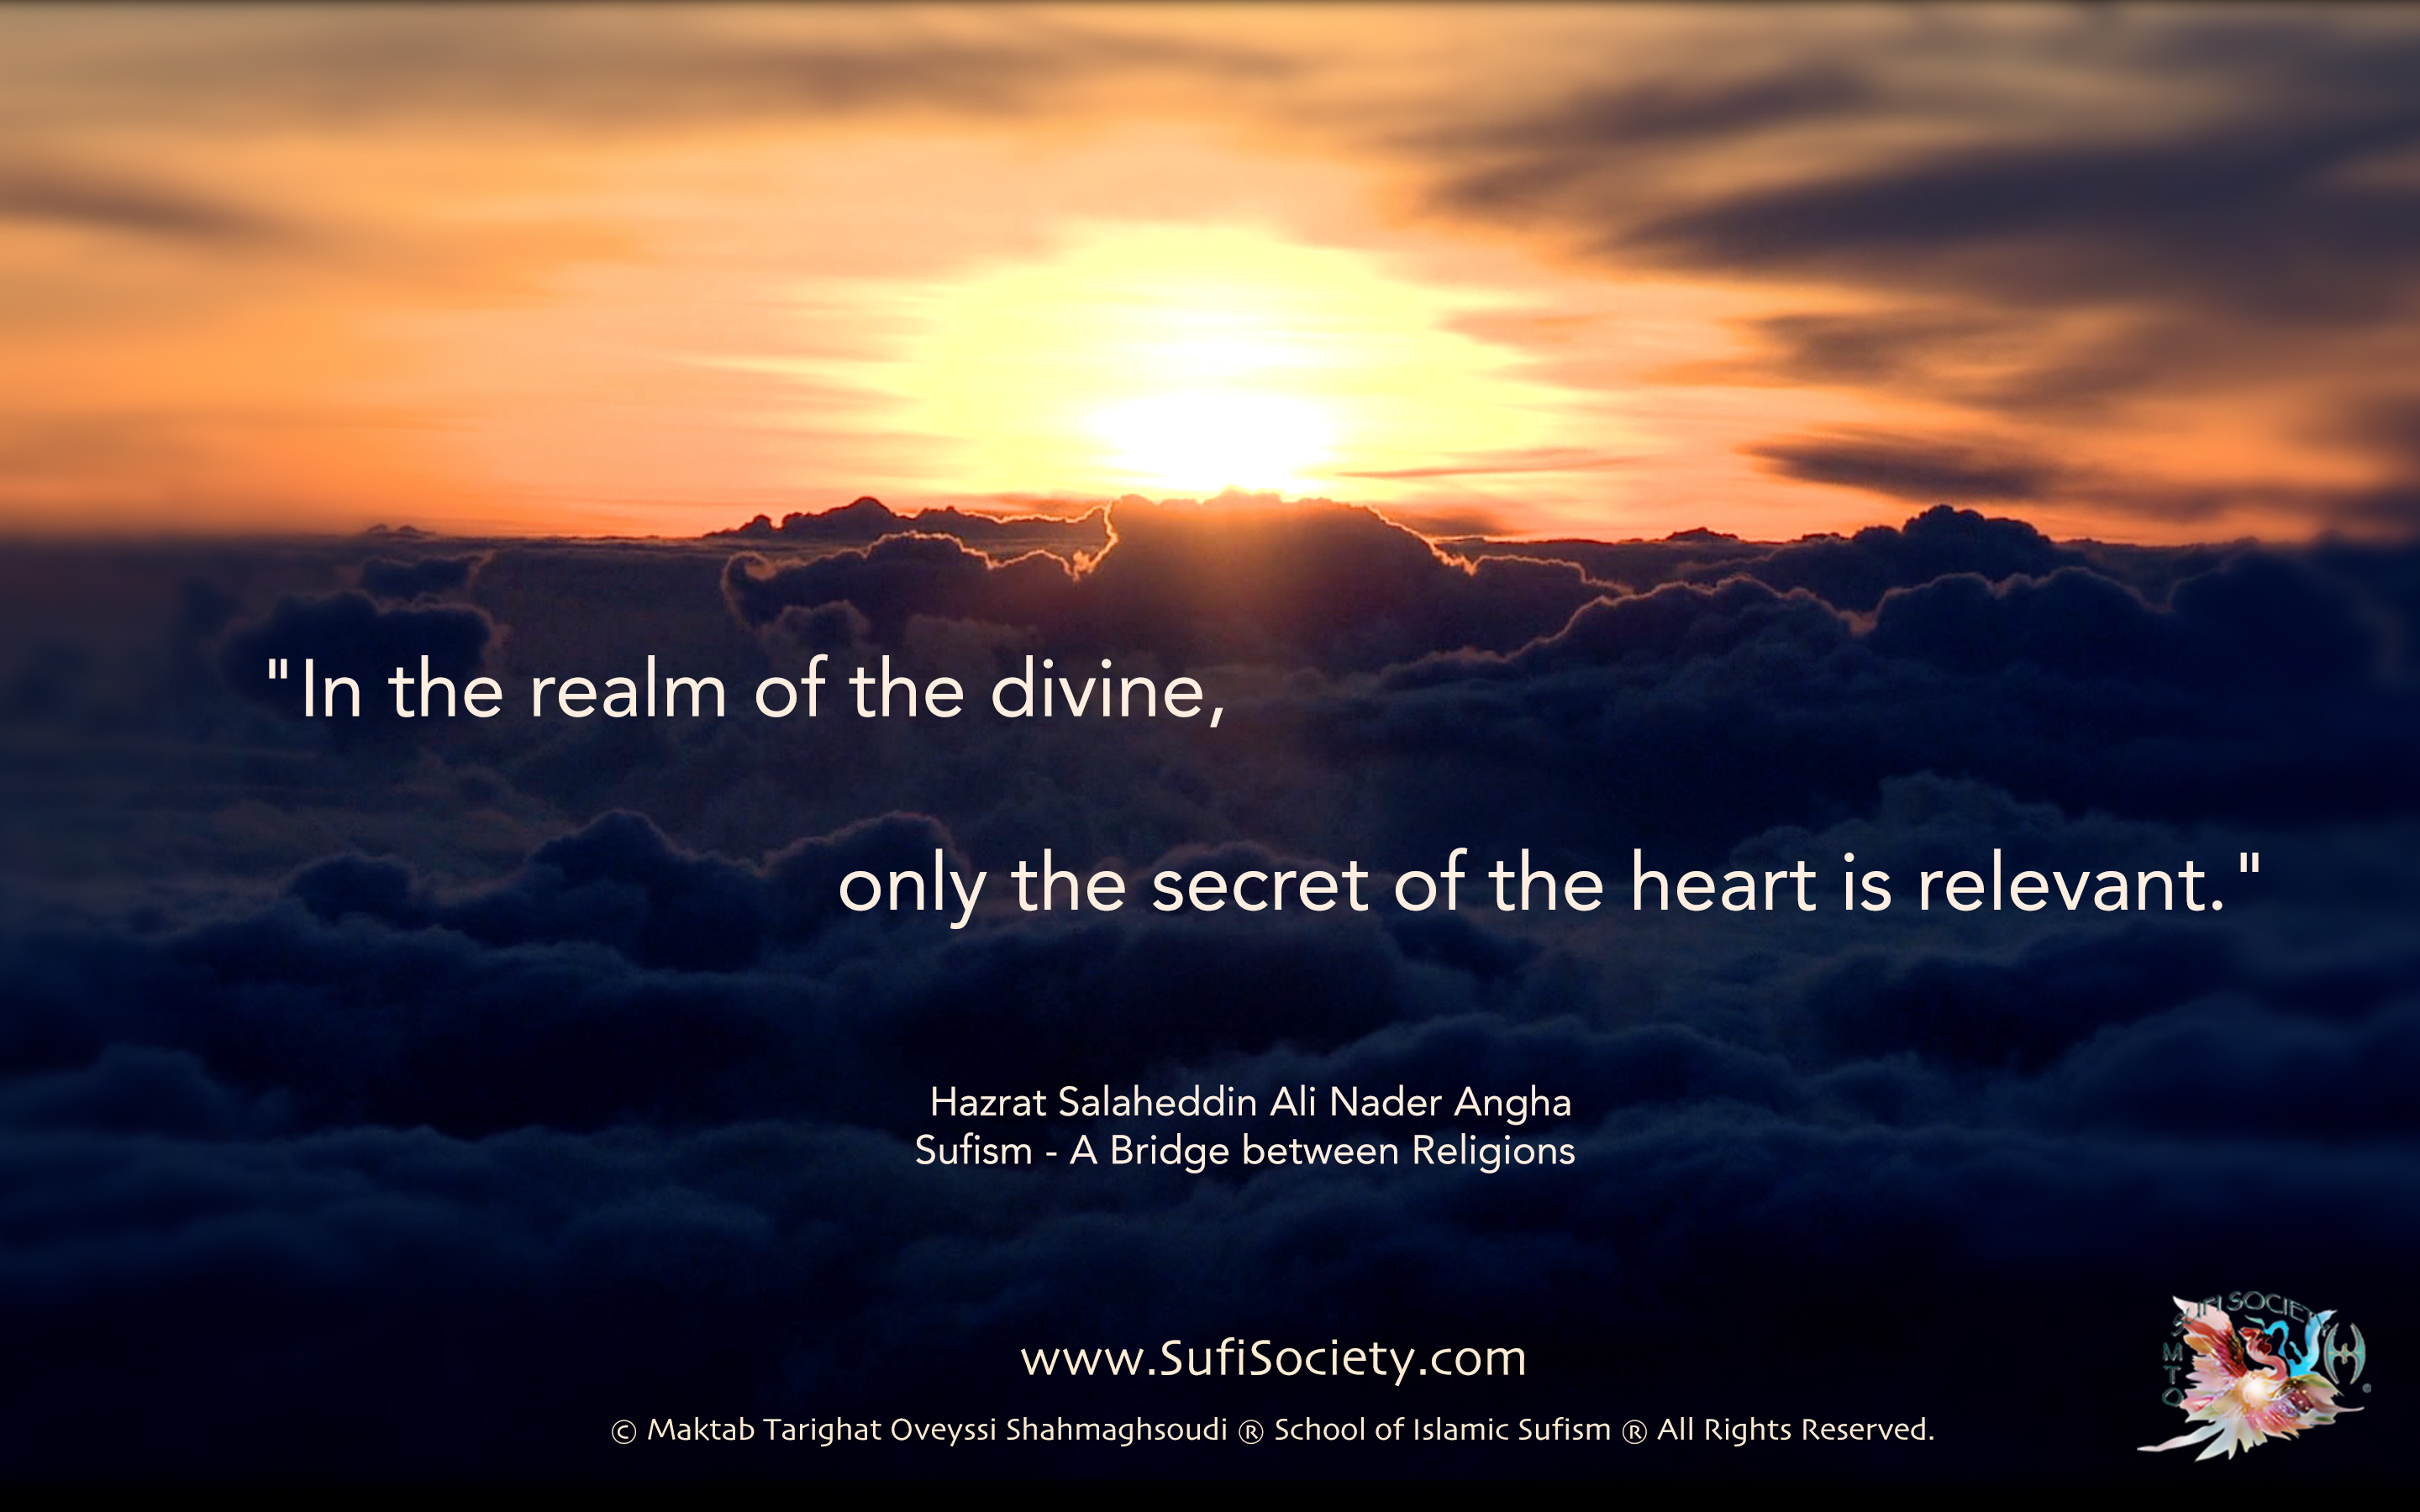 "In the realm of the divine, only the secret of the heart is relevant." Hazrat Salaheddin Ali Nader Angha Sufism - A Bridge between Religions